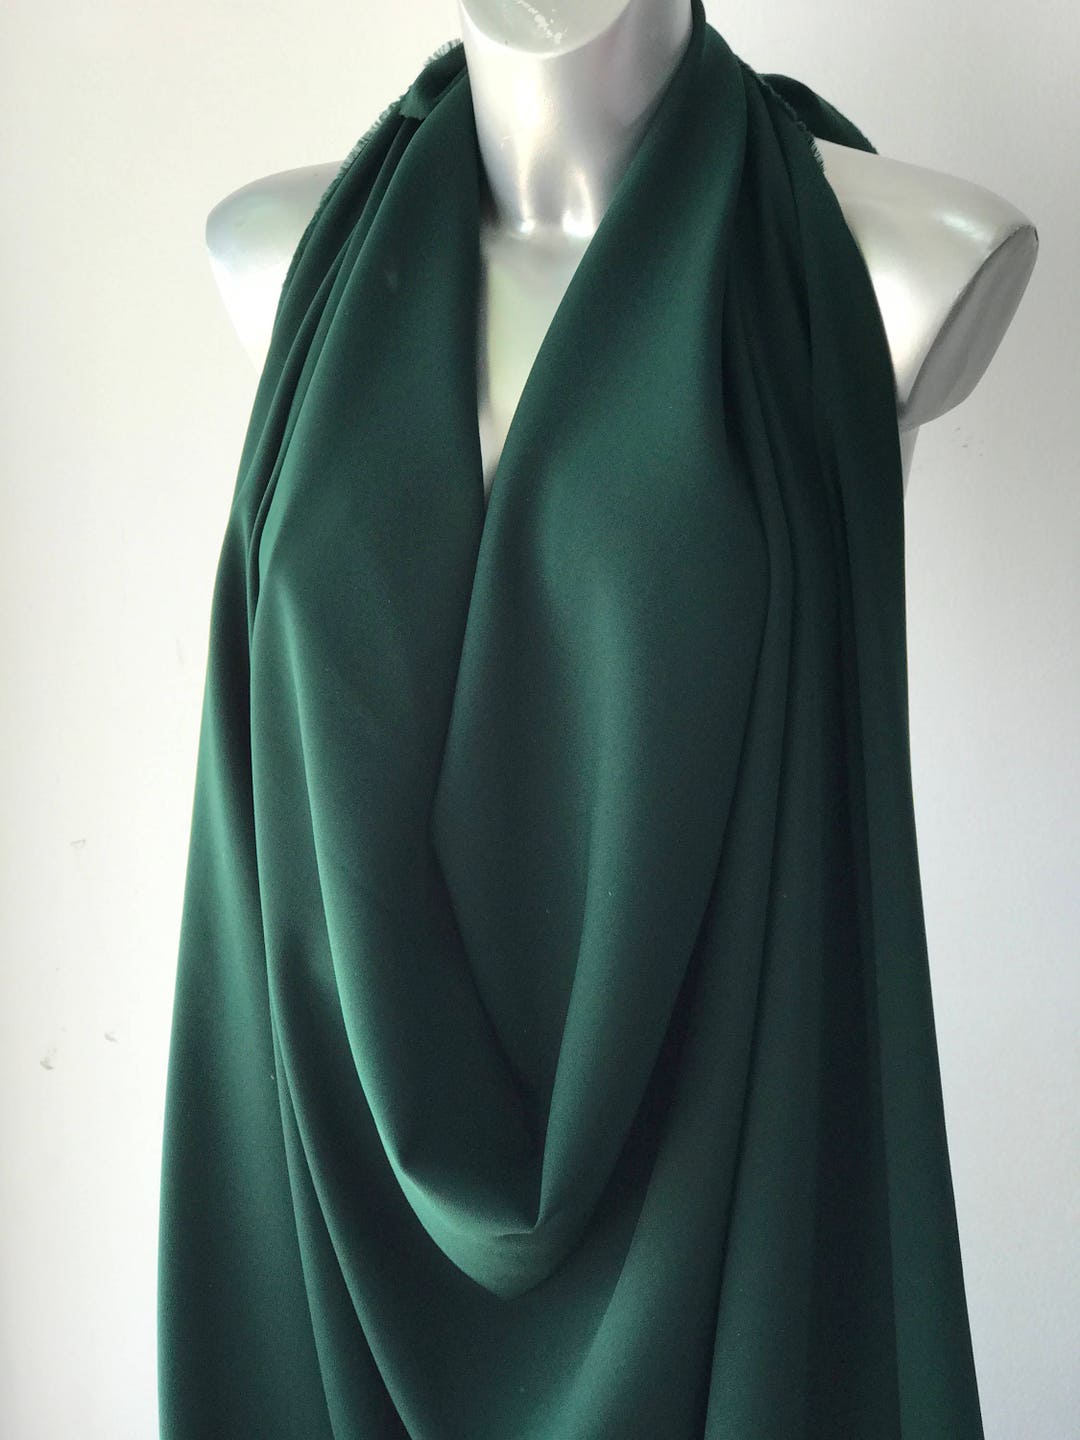 Green Crepe Back Satin Fabric 2 Way Stretch Polyester Spandex 150cm 60 ...